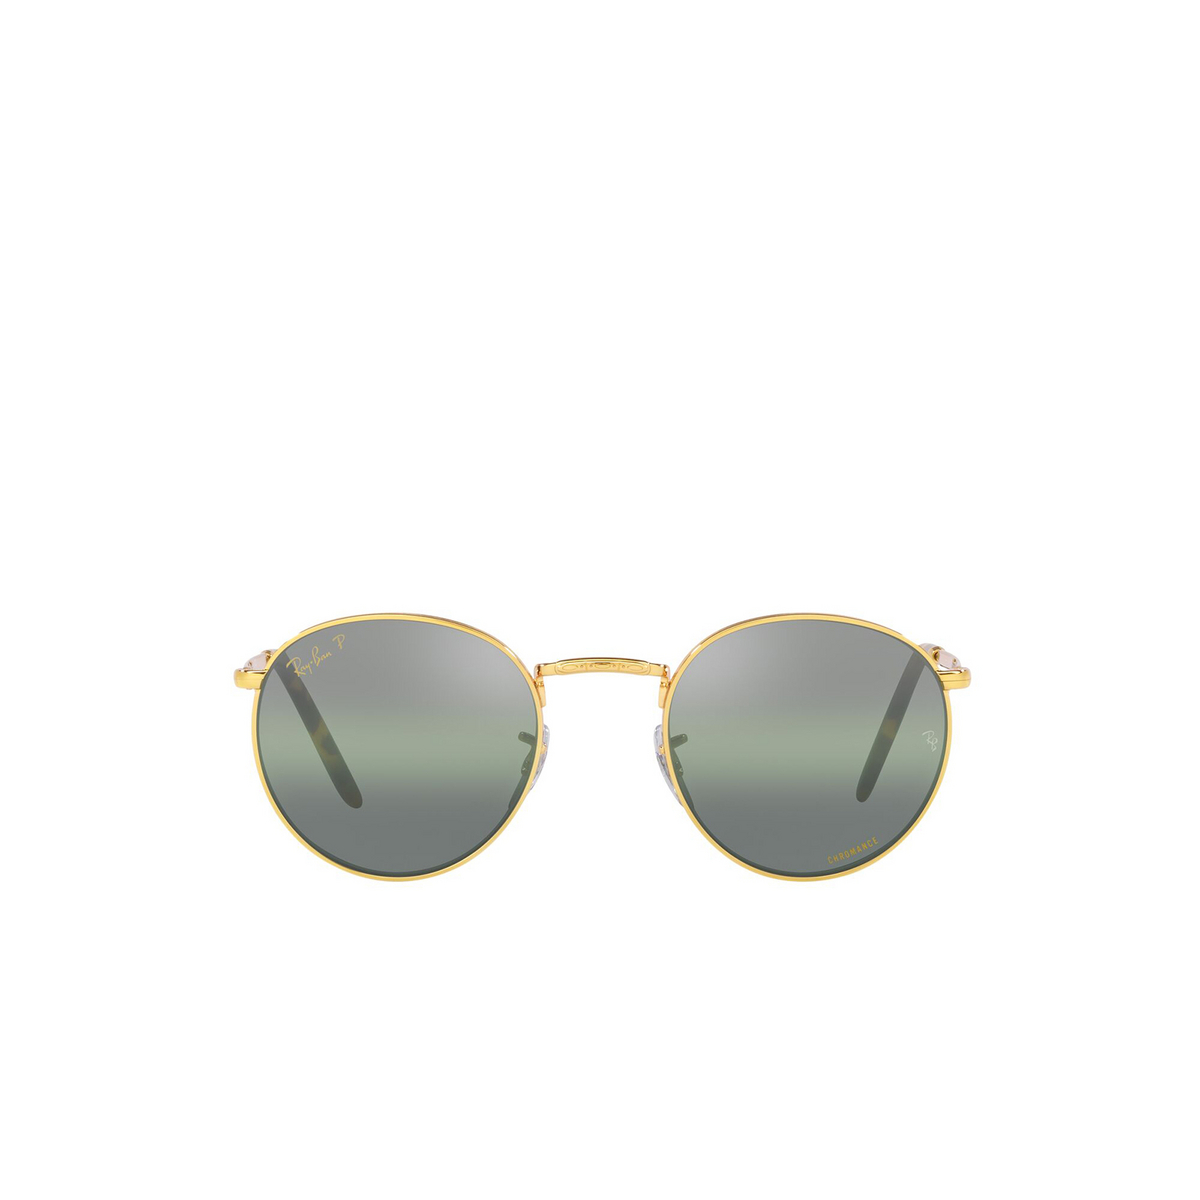 Ray-Ban NEW ROUND Sunglasses 9196G4 Legend Gold - front view